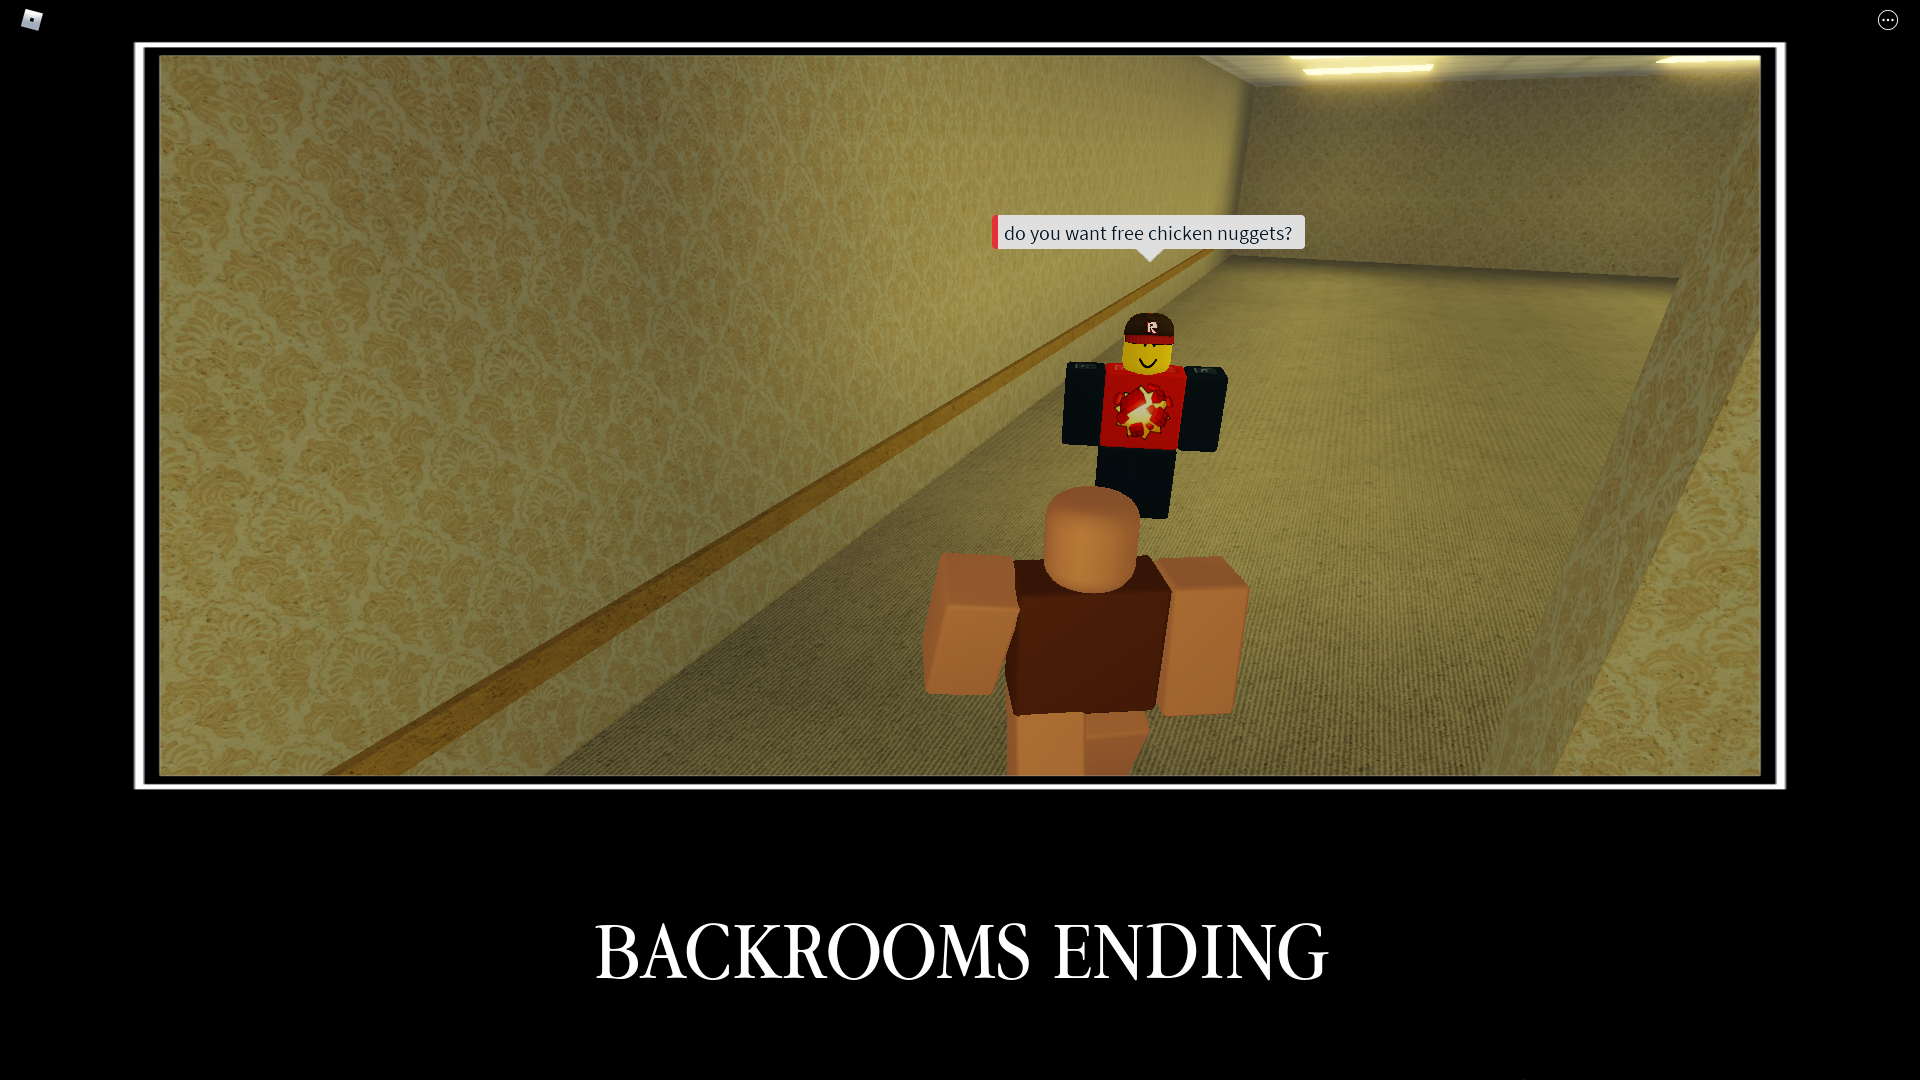 Guys? I ended up in a frickin' backrooms level 0. Any tips to do